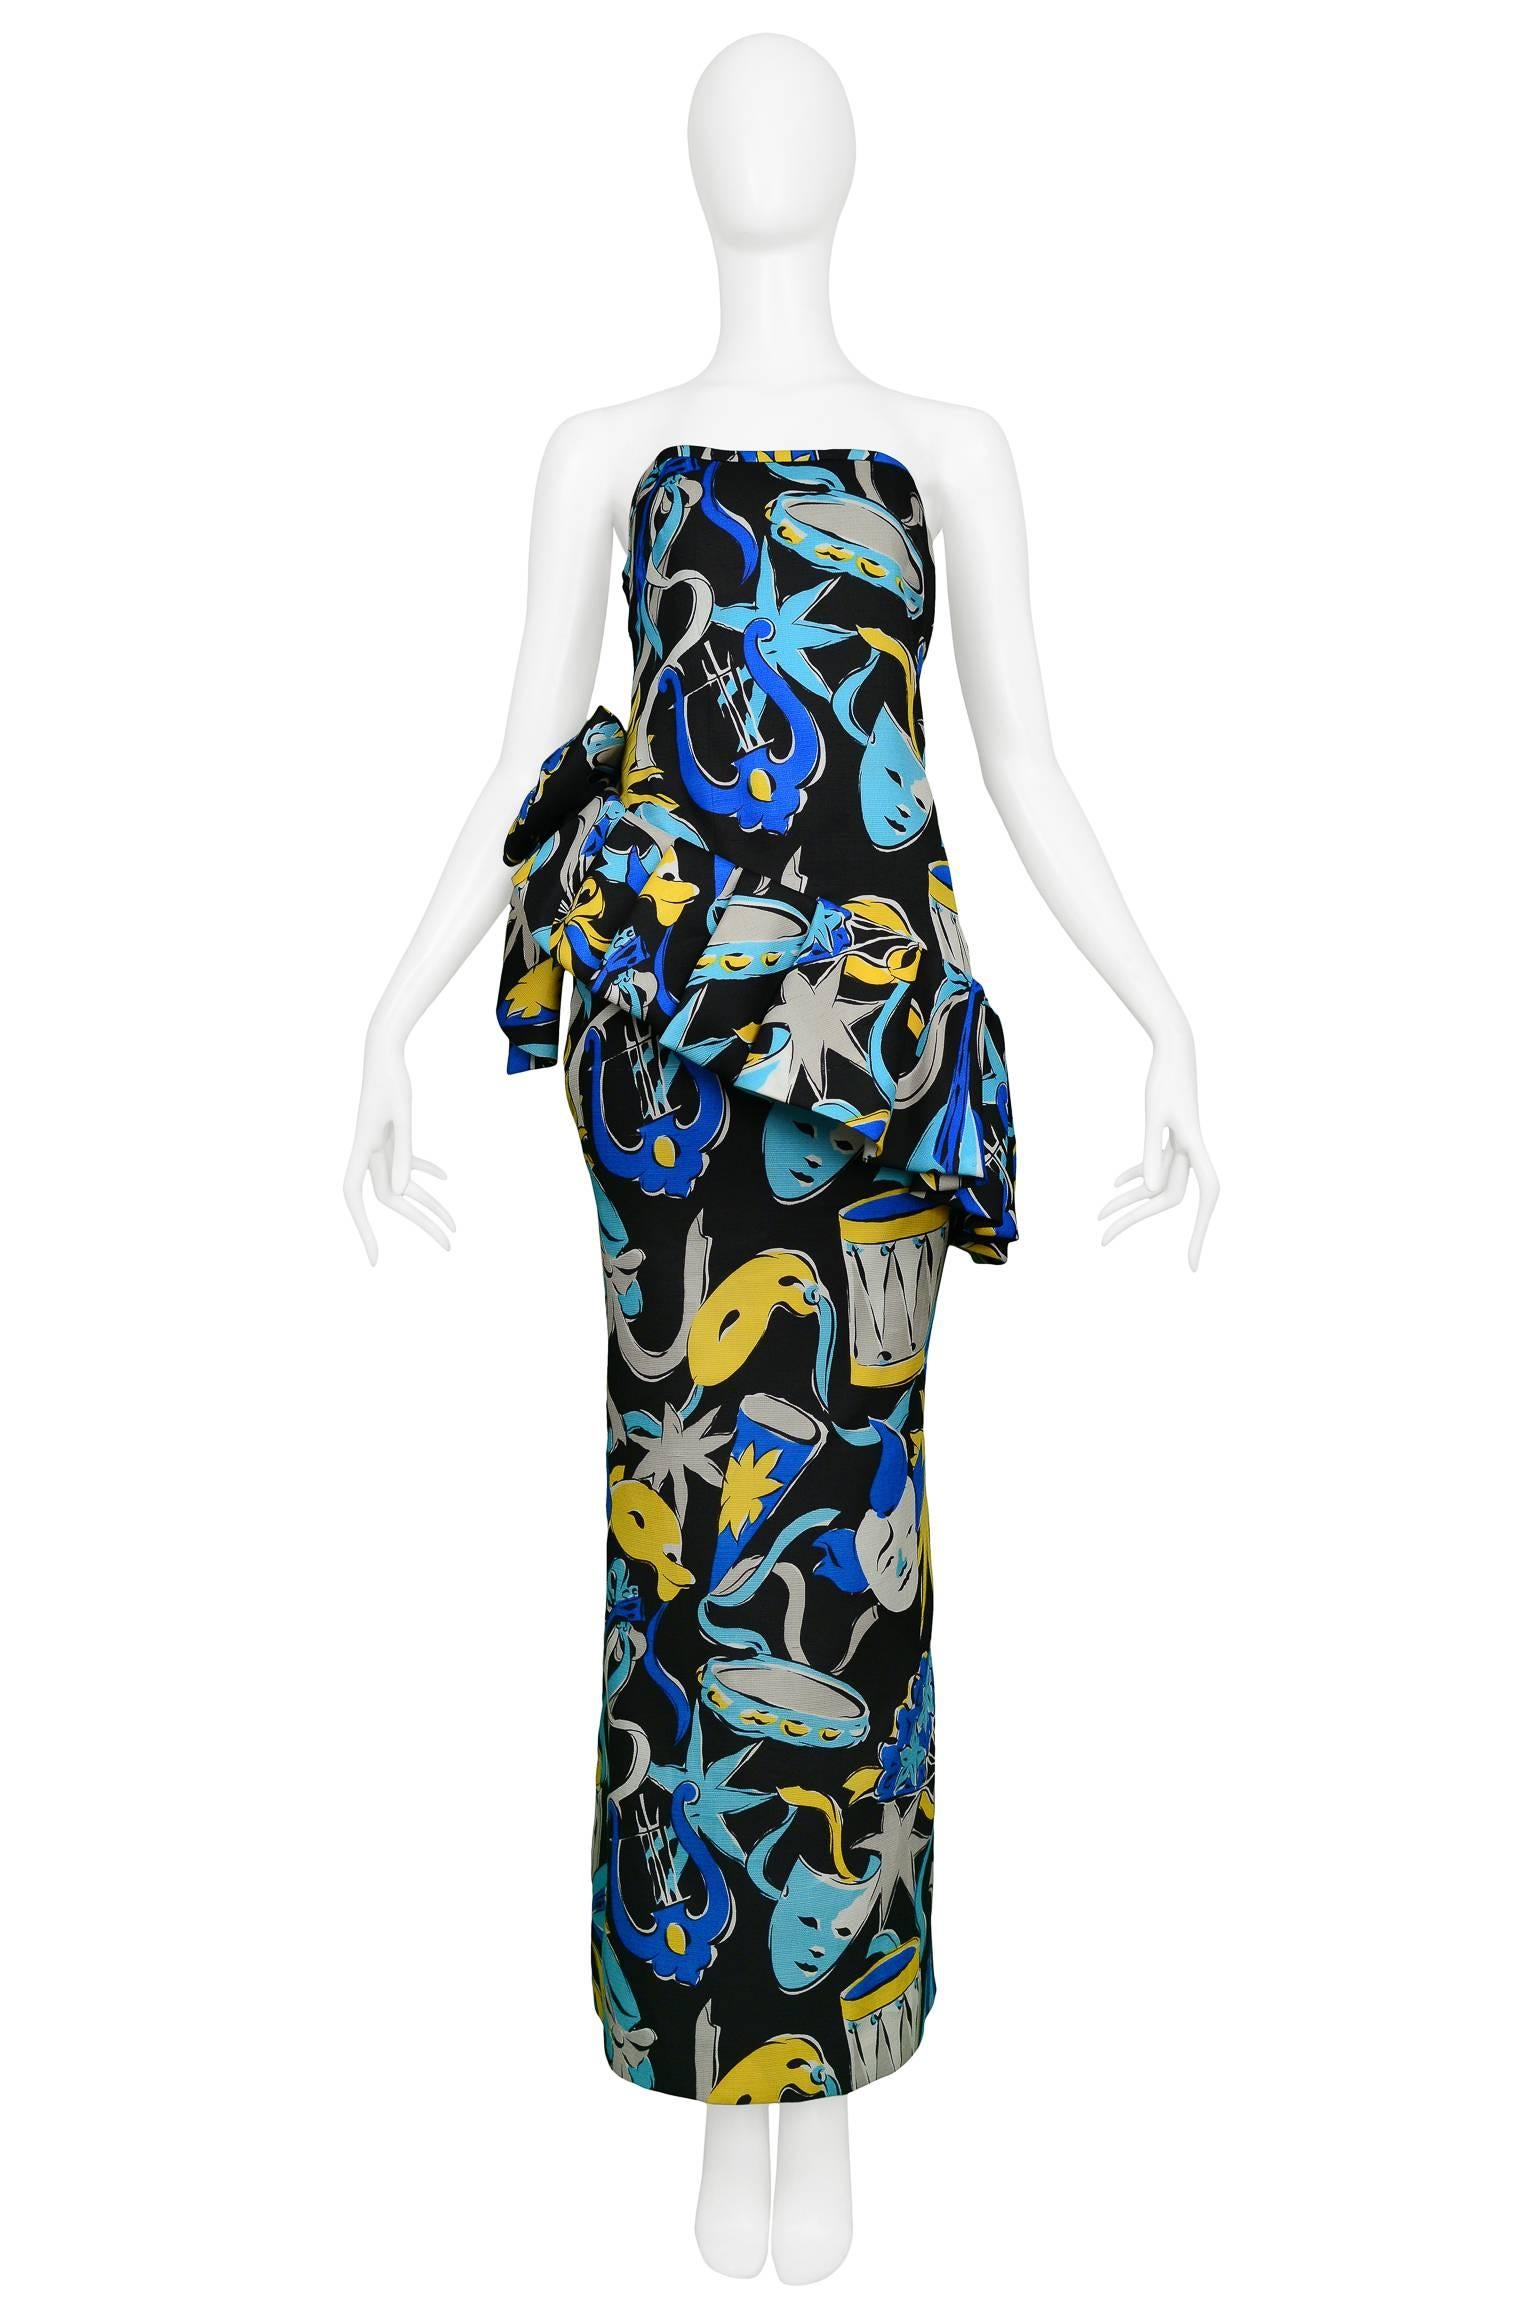 A stunning vintage Yves Saint Laurent blue, black and yellow strapless evening gown with masquerade and stars Picasso-esque print. The gown features an asymmetrical ruffle with bow at the waist.  Classic YSL.